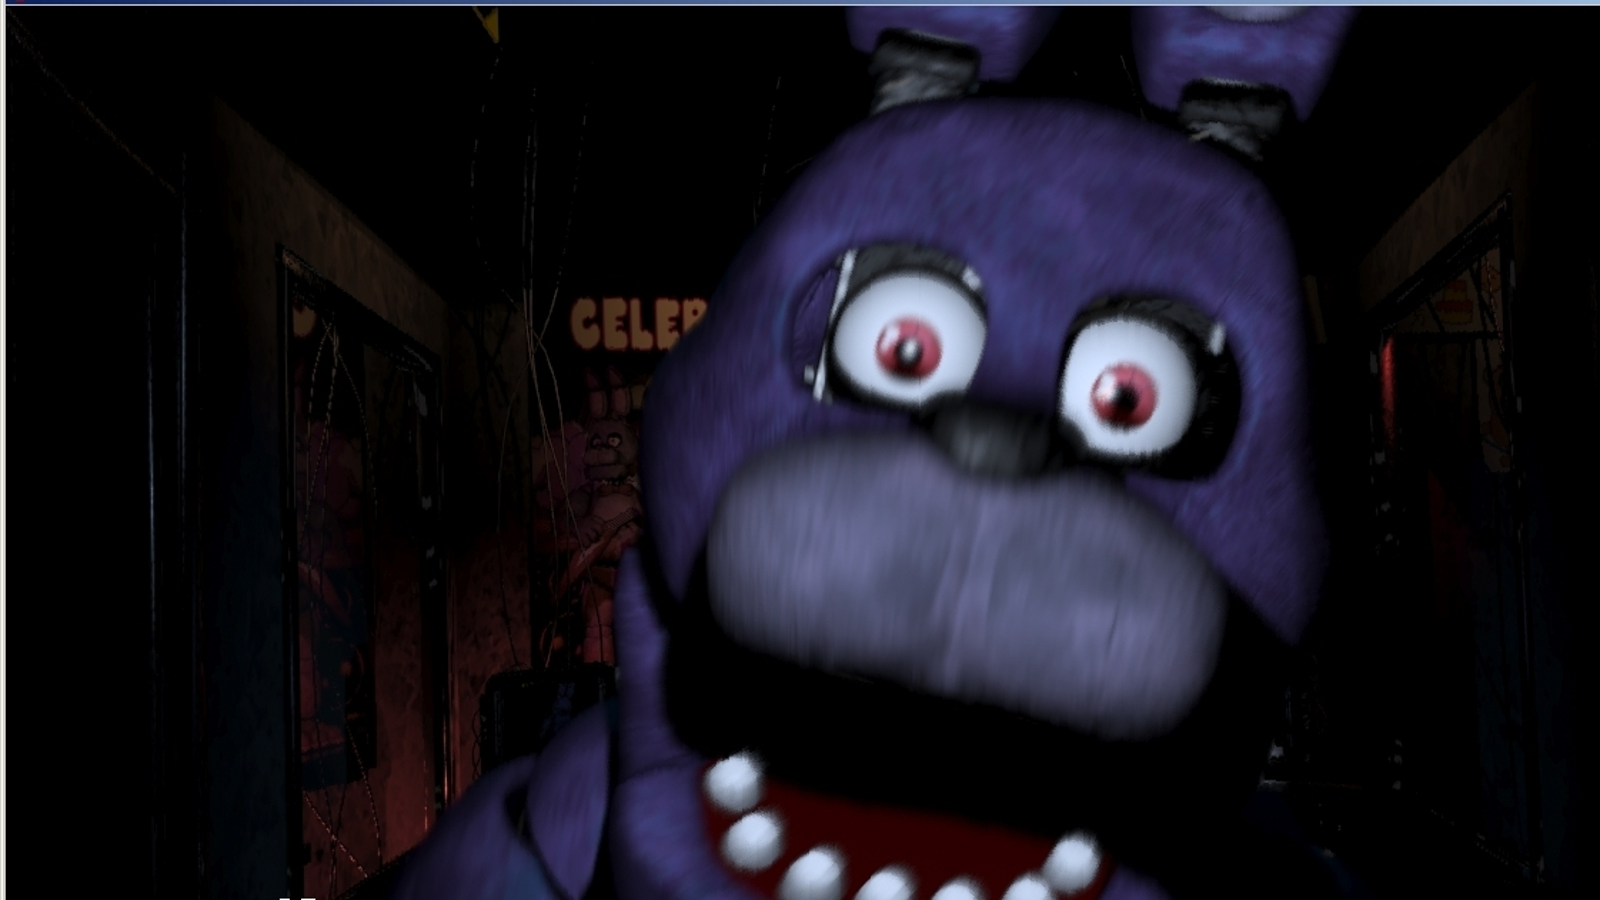 FNAF in the Darkness - The Joy of Creation: Ignited Collection